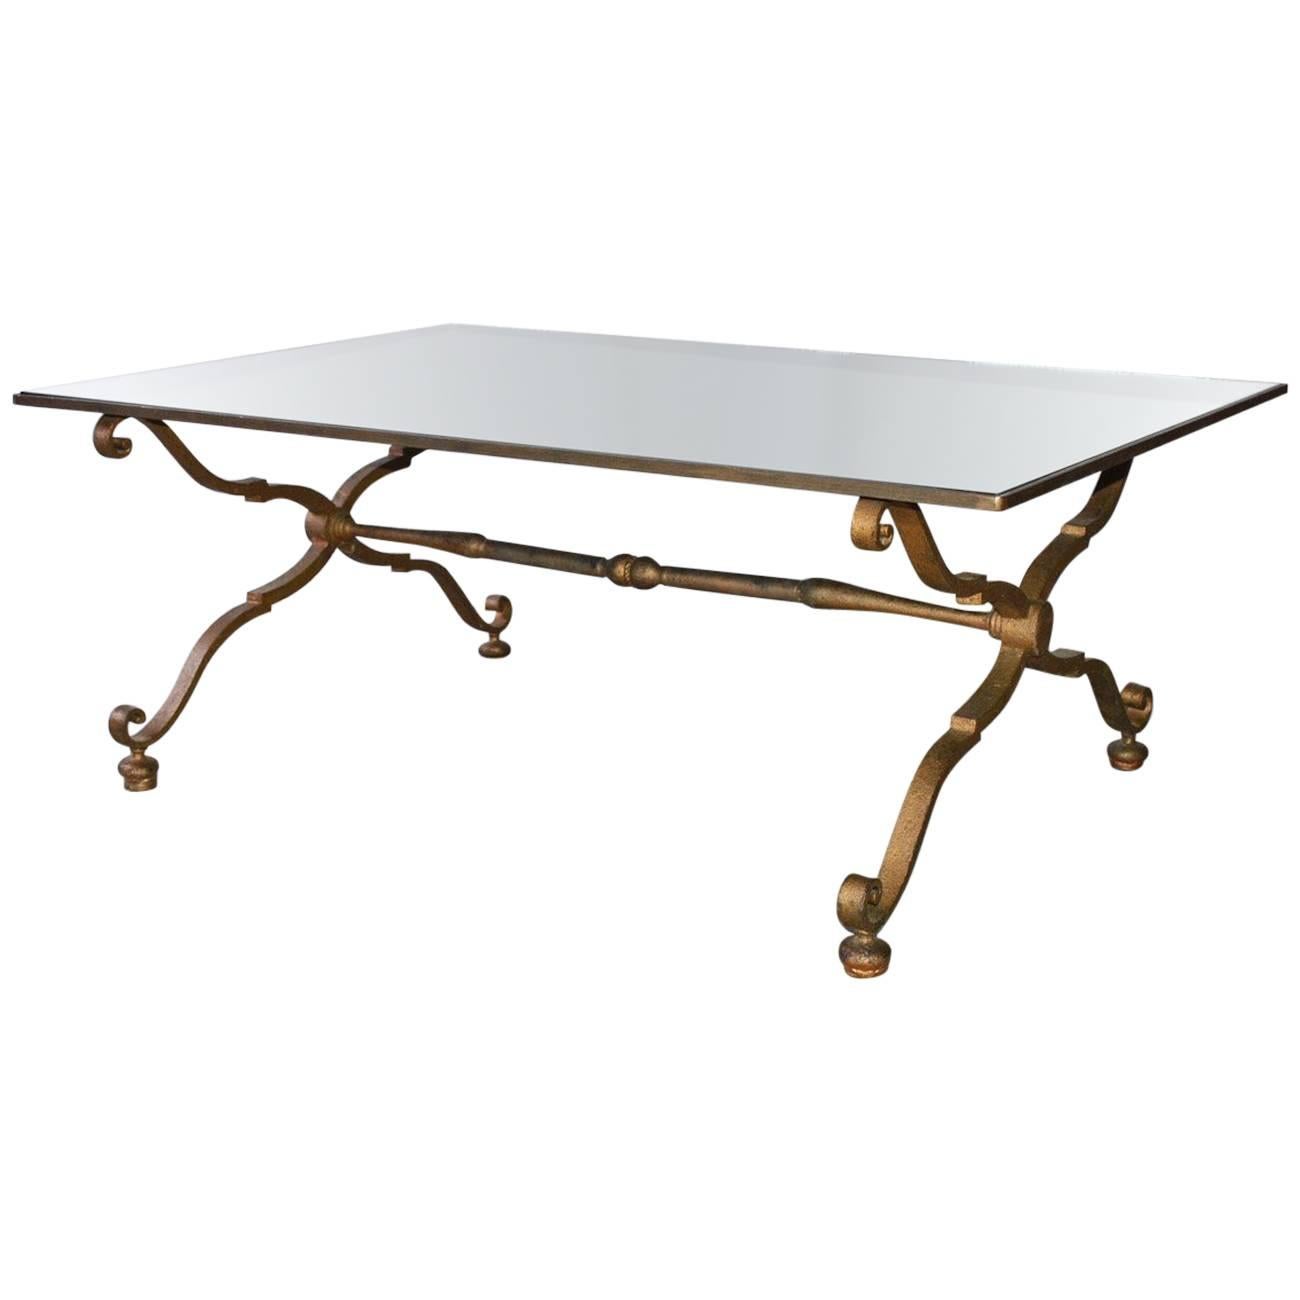 Vintage Gilt Wrought Iron and Mirrored Coffee Table For Sale